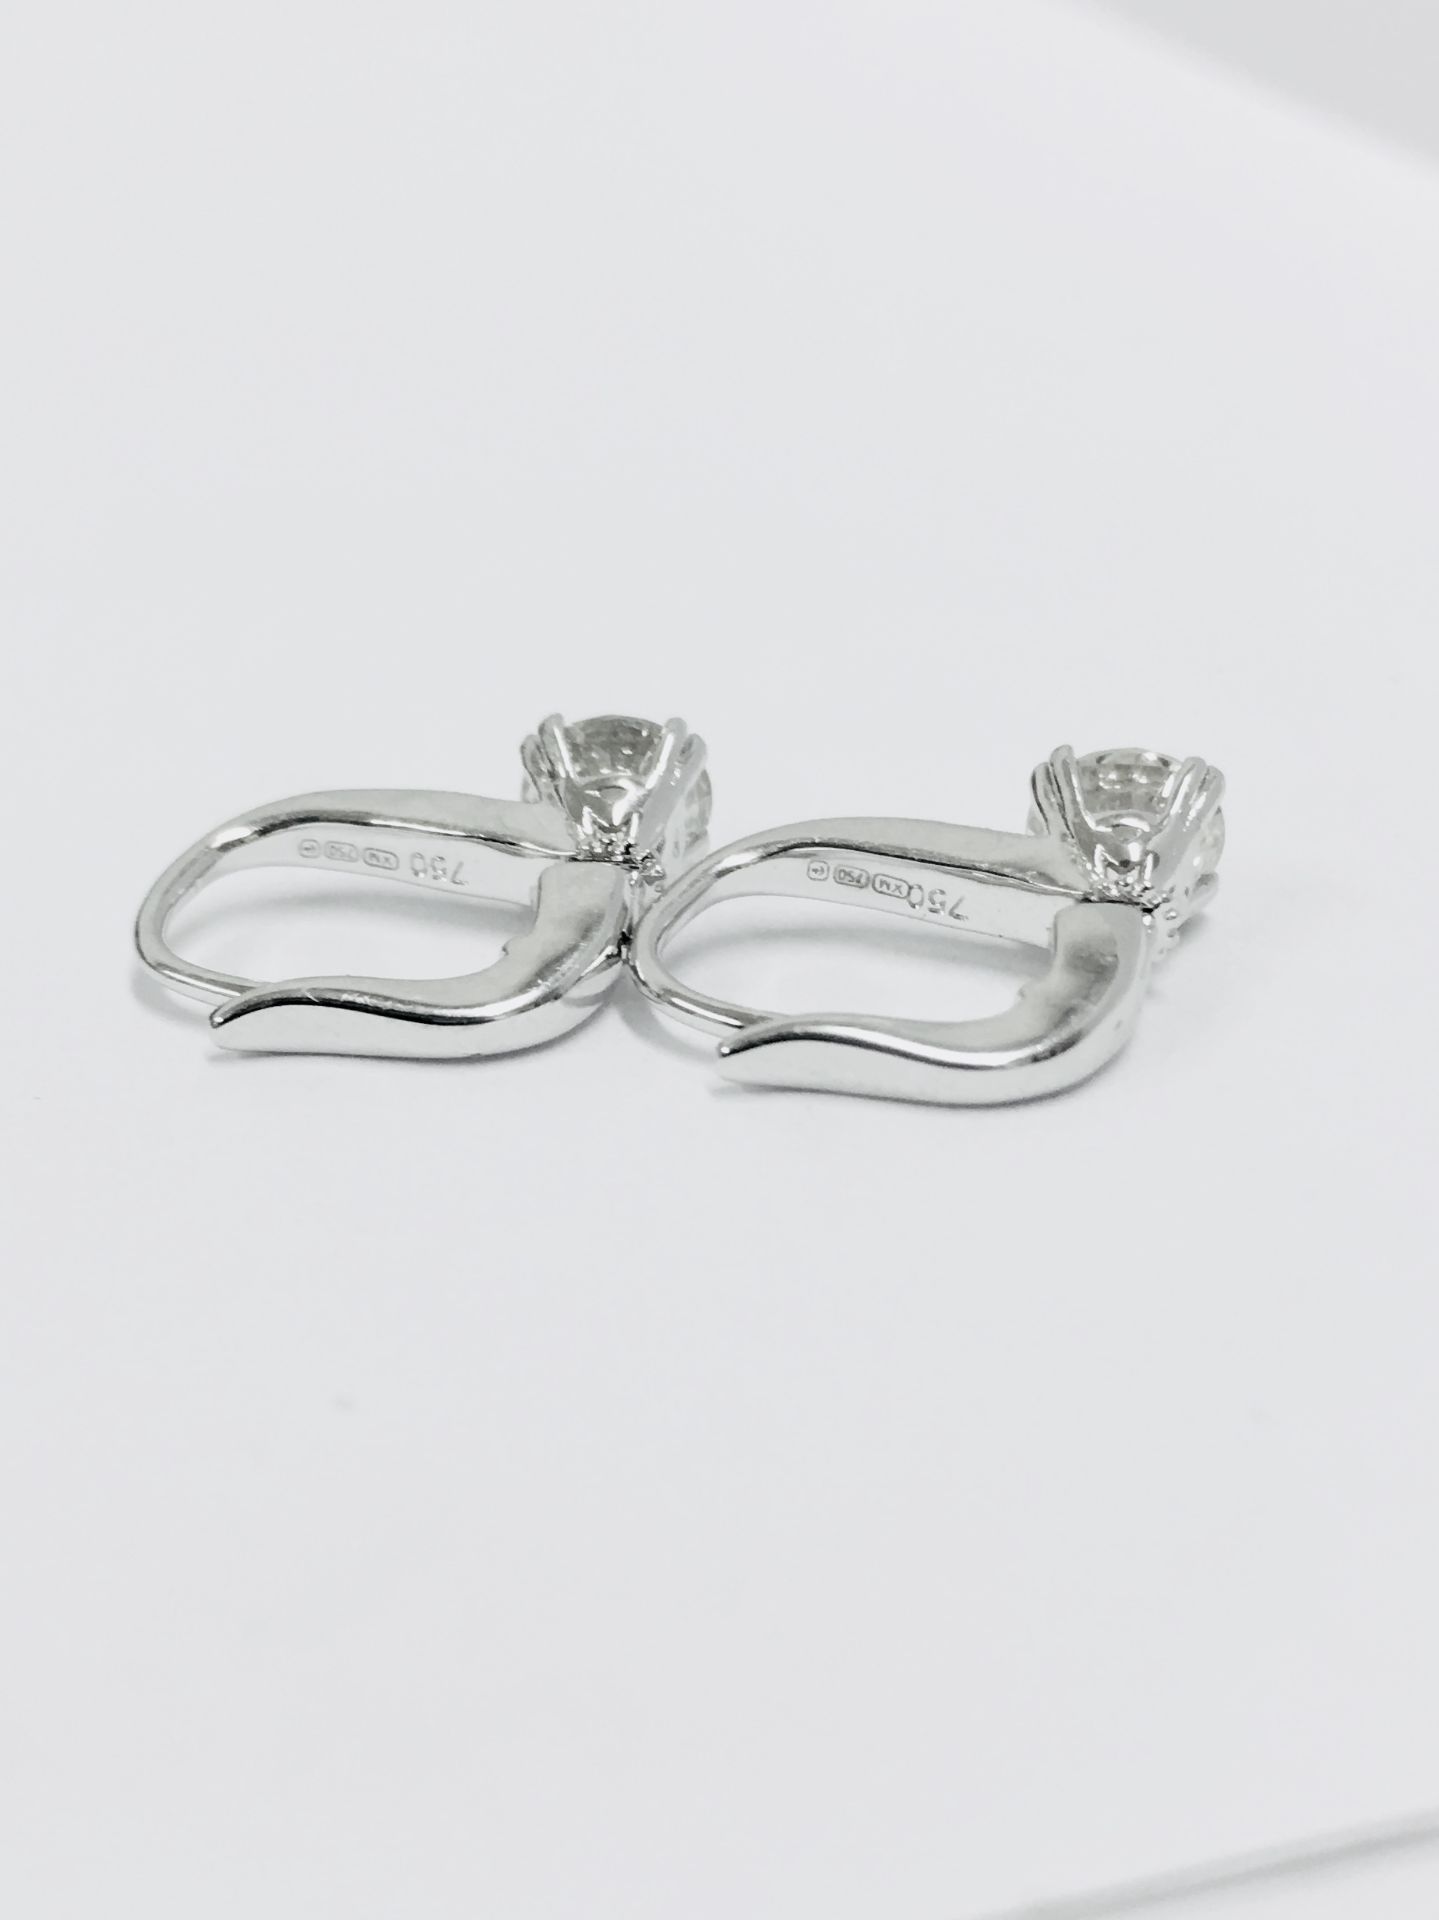 18Ct White Gold Hoop Style Earrings With Hinge Fastners. - Image 13 of 22